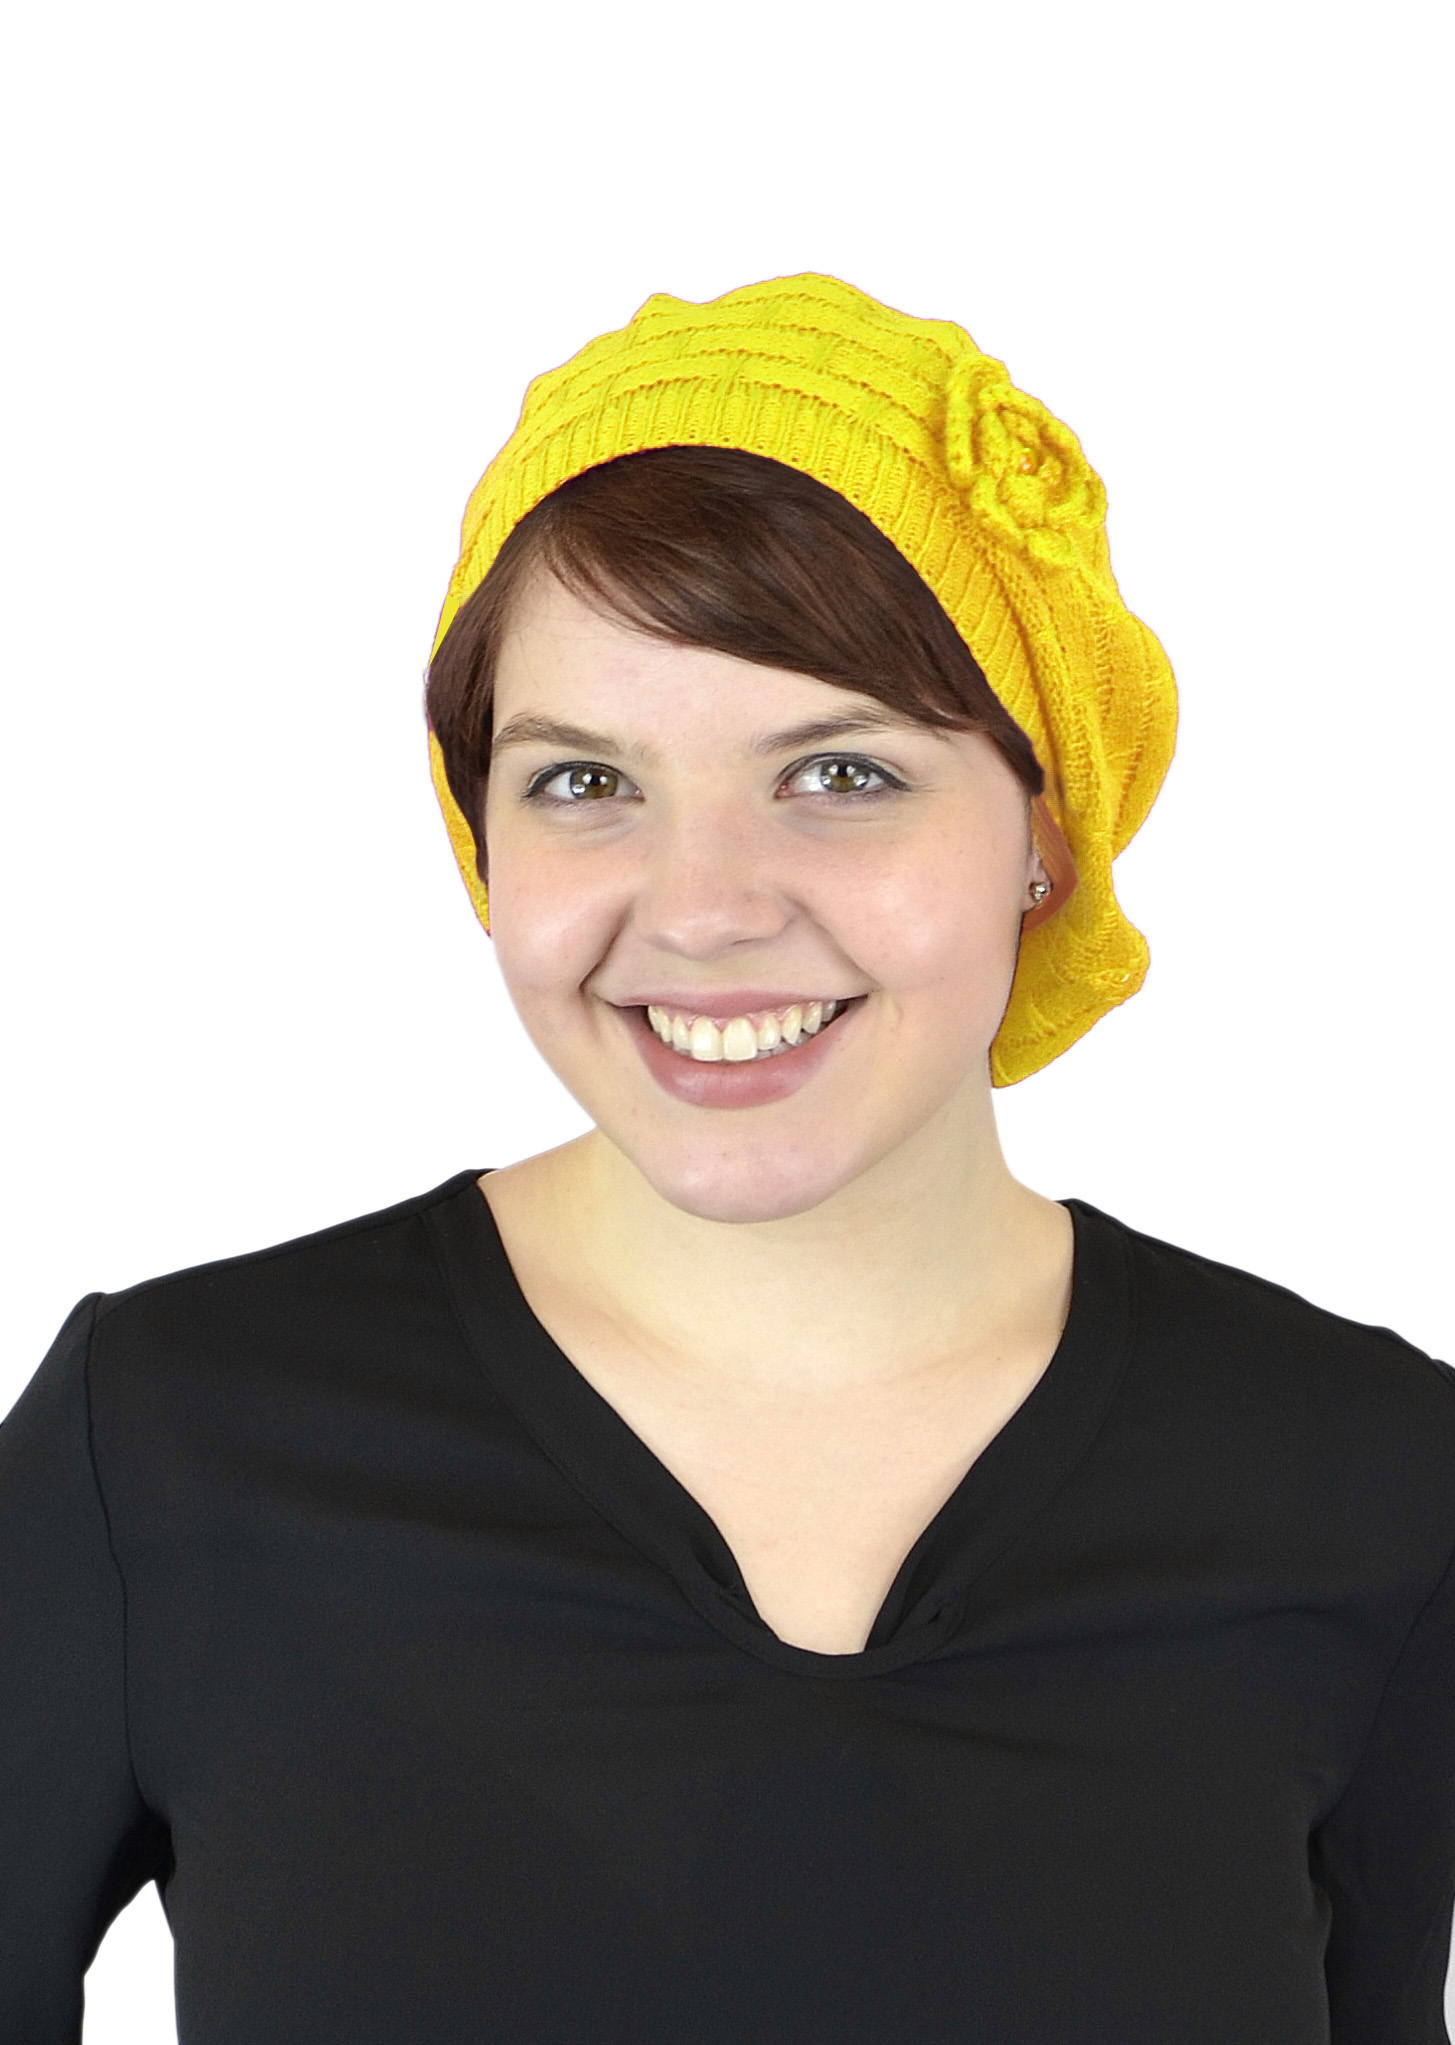 Belle Donne-Women's Mesh Crocheted Flower Accented Slouchy Beret Hat- Yellow